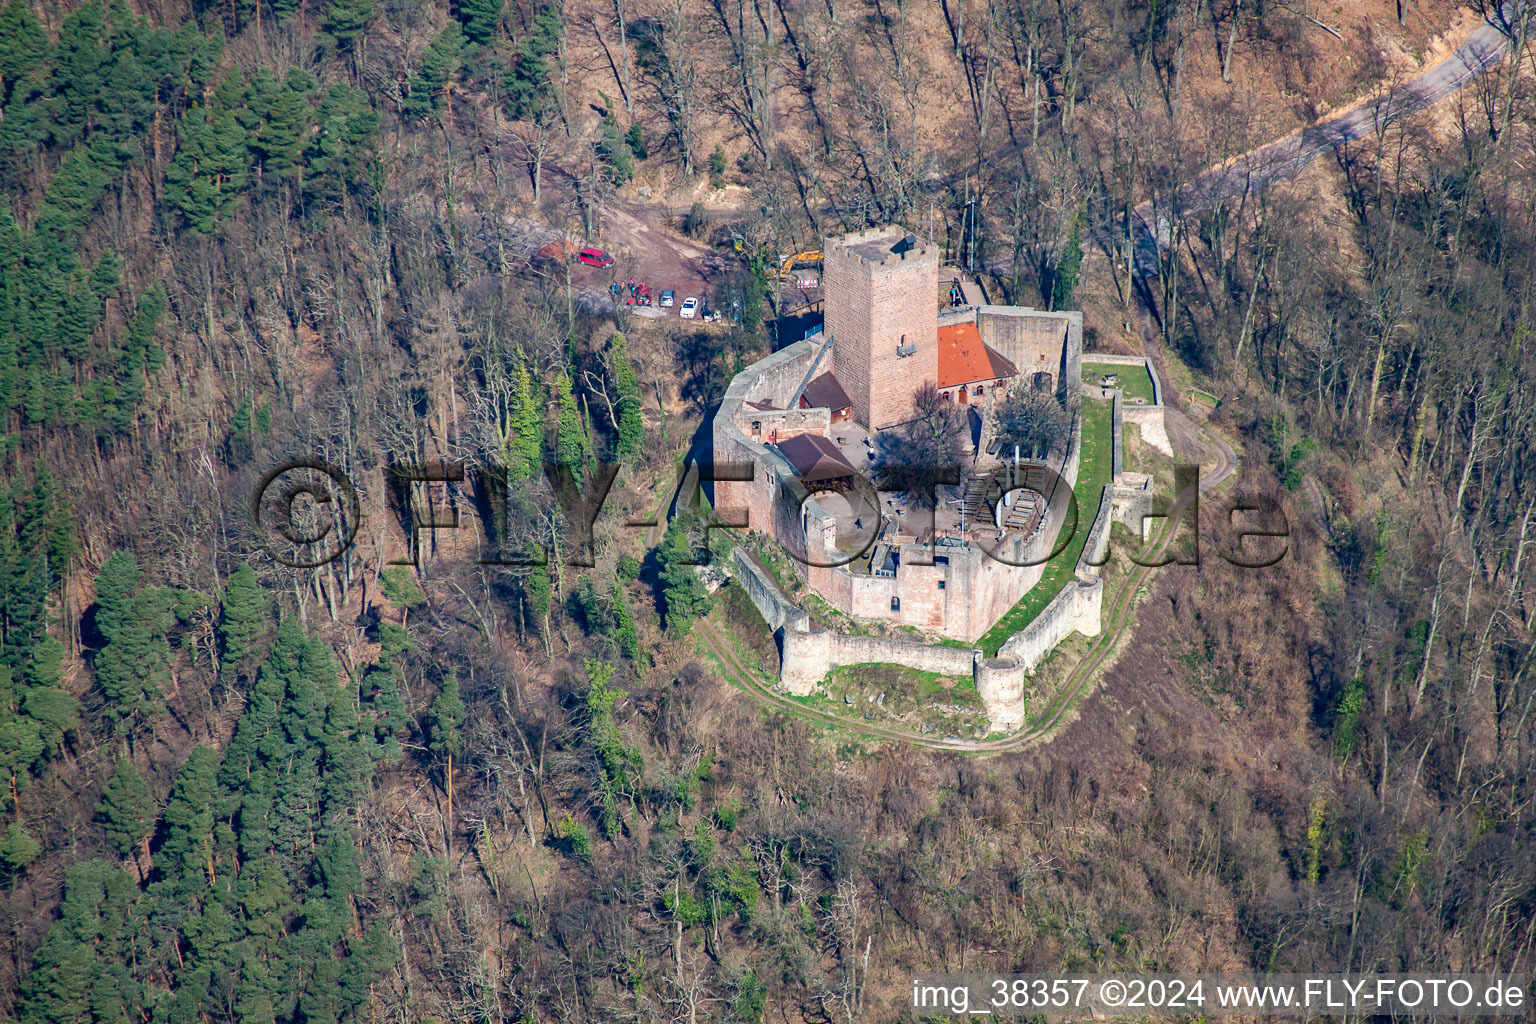 Aerial view of Ruins and vestiges of the former castle and fortress Burg Landeck in Klingenmuenster in the state Rhineland-Palatinate, Germany